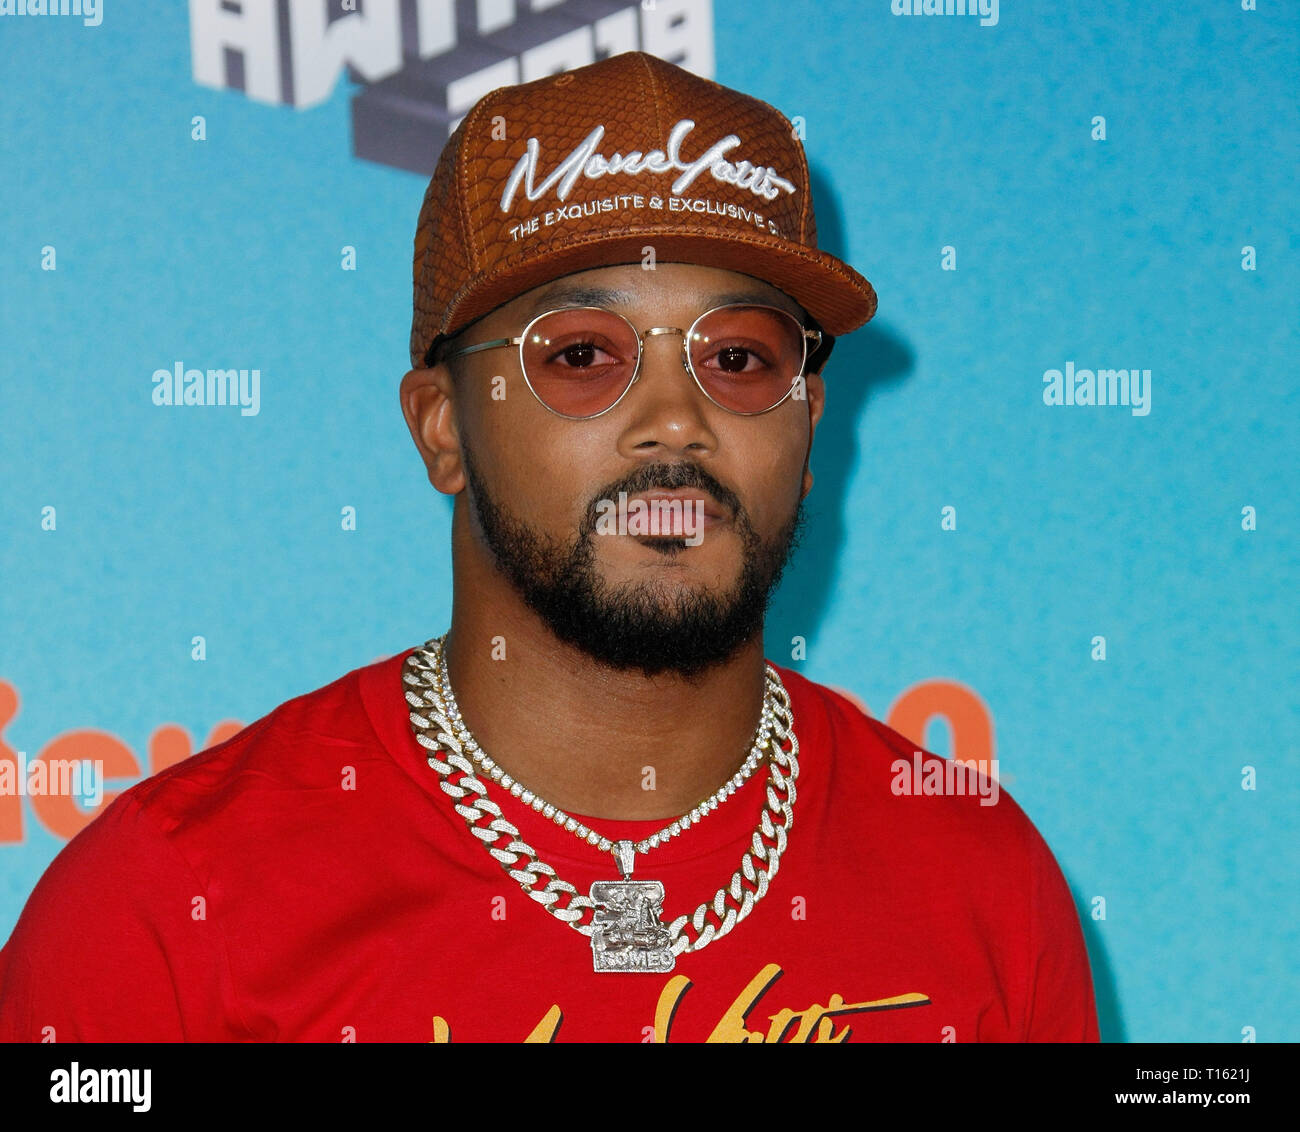 Los Angeles, USA. 23rd Mar, 2019. Romeo attends Nickelodeon's 2019 Kids' Choice Awards at Galen Center on March 23, 2019 in Los Angeles, California. Photo: imageSPACE Credit: Imagespace/Alamy Live News Stock Photo